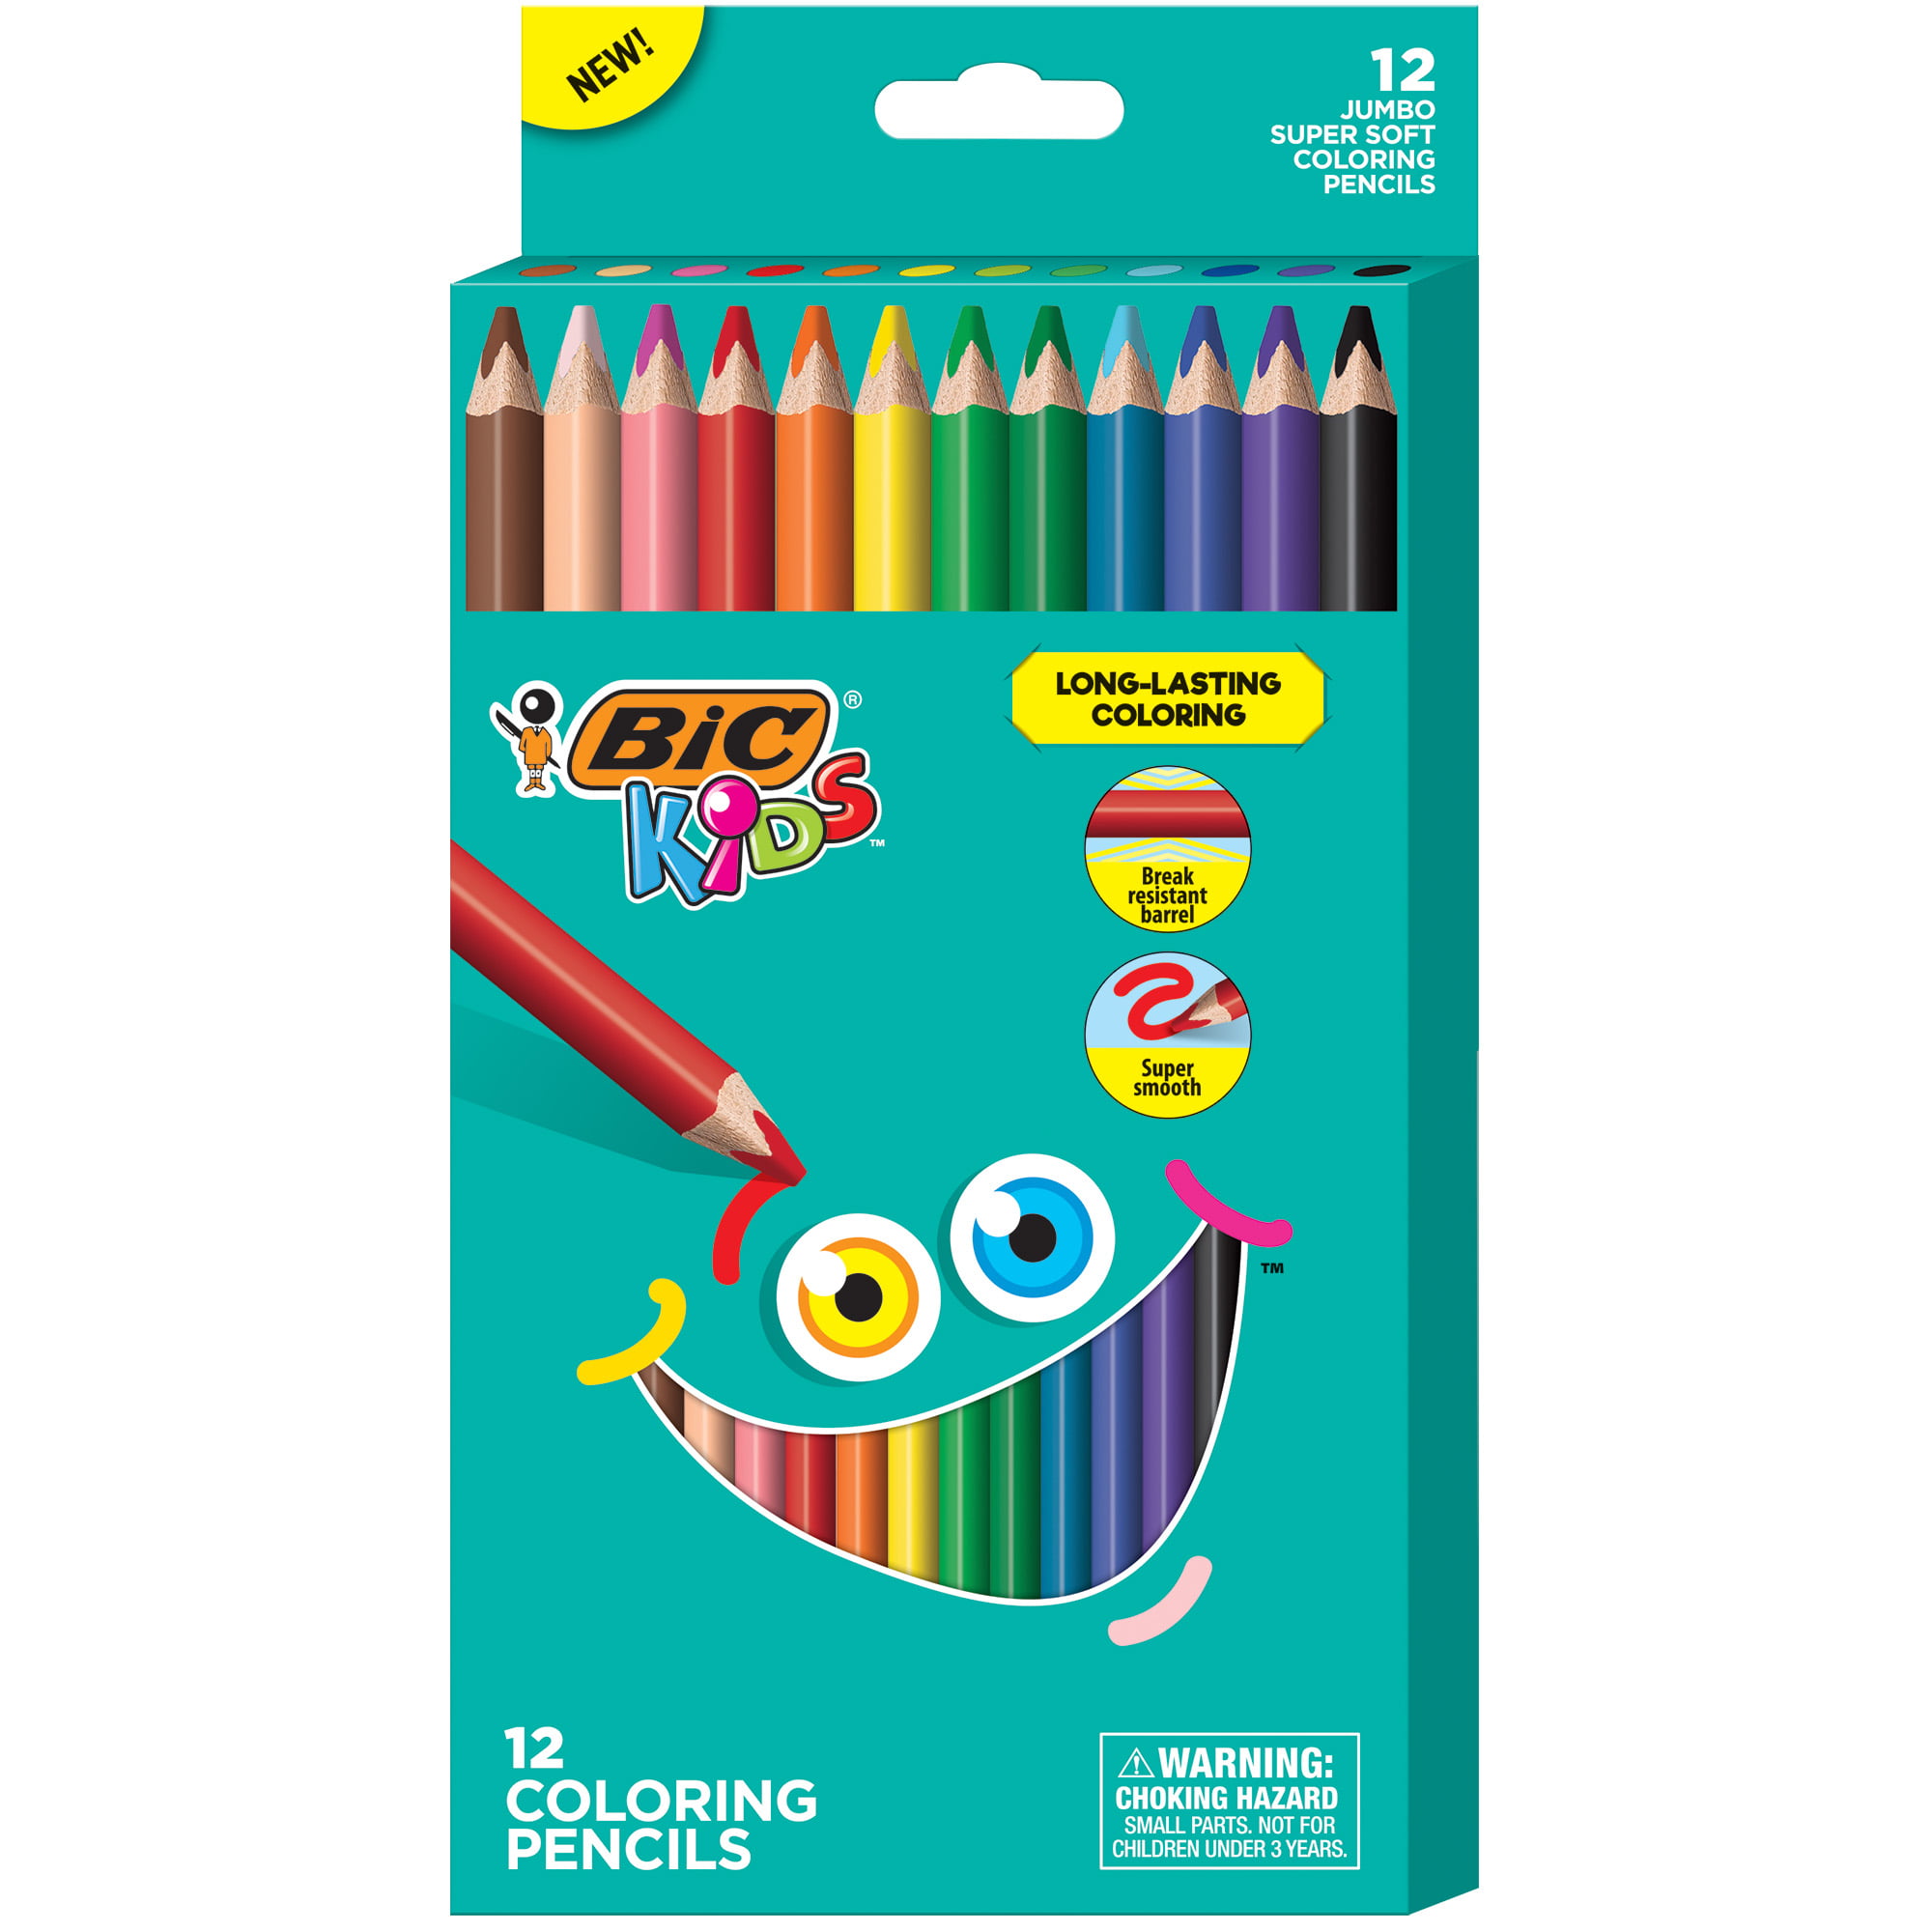 BiC Kids 36 Assorted Pens Pencils and Crayons Colouring Set Art Activity Gift 